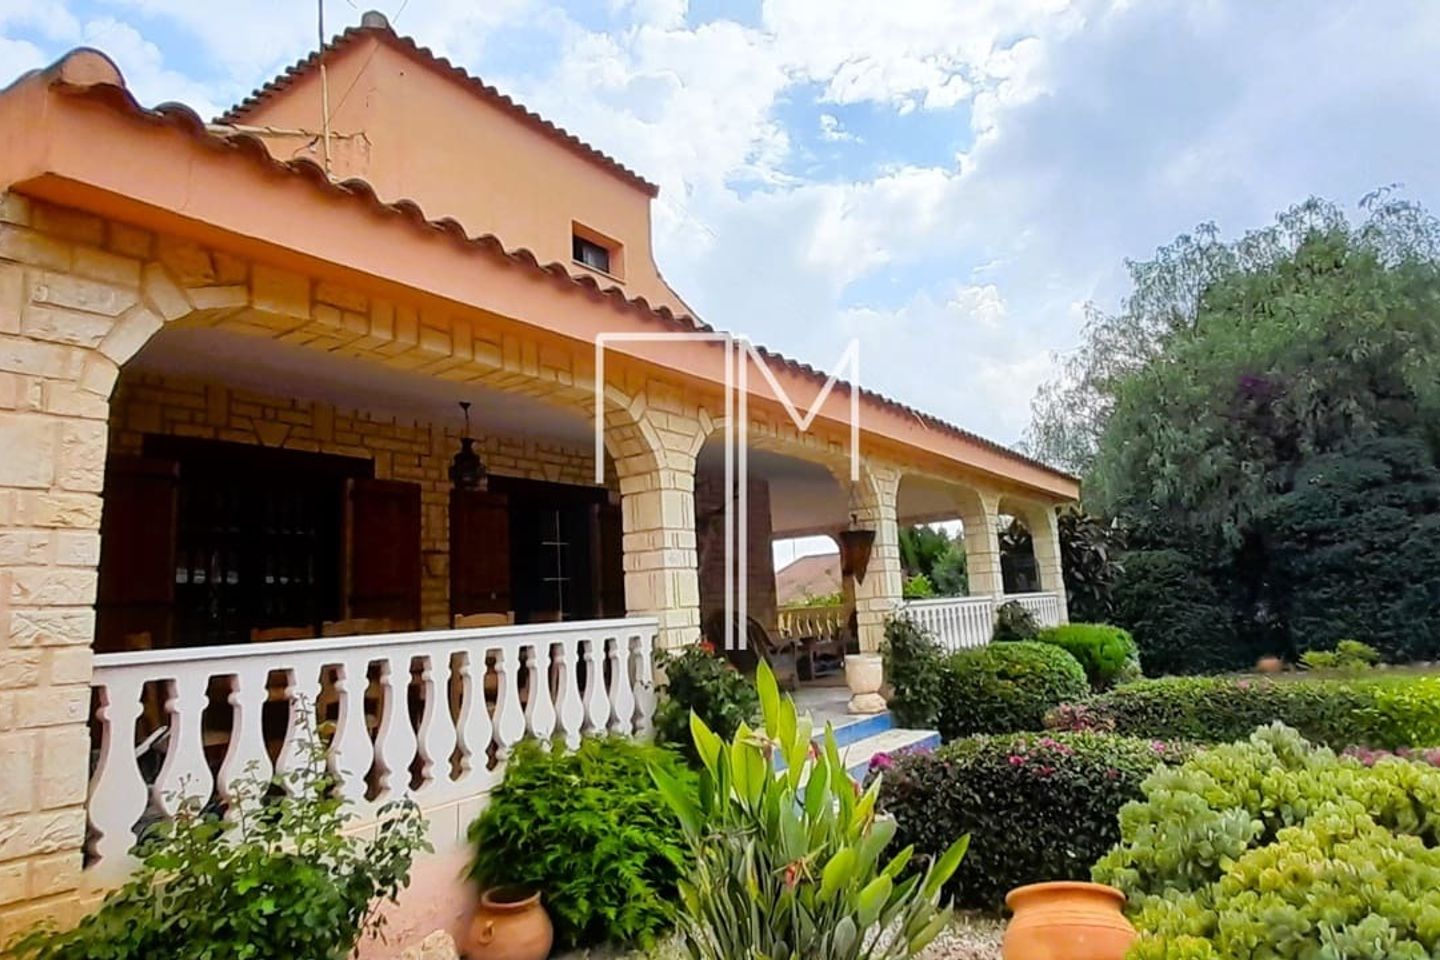 Luxury 4 Bed Villa With Apartment For Sale In Alberic Valenica Spain, Valencia, Spain